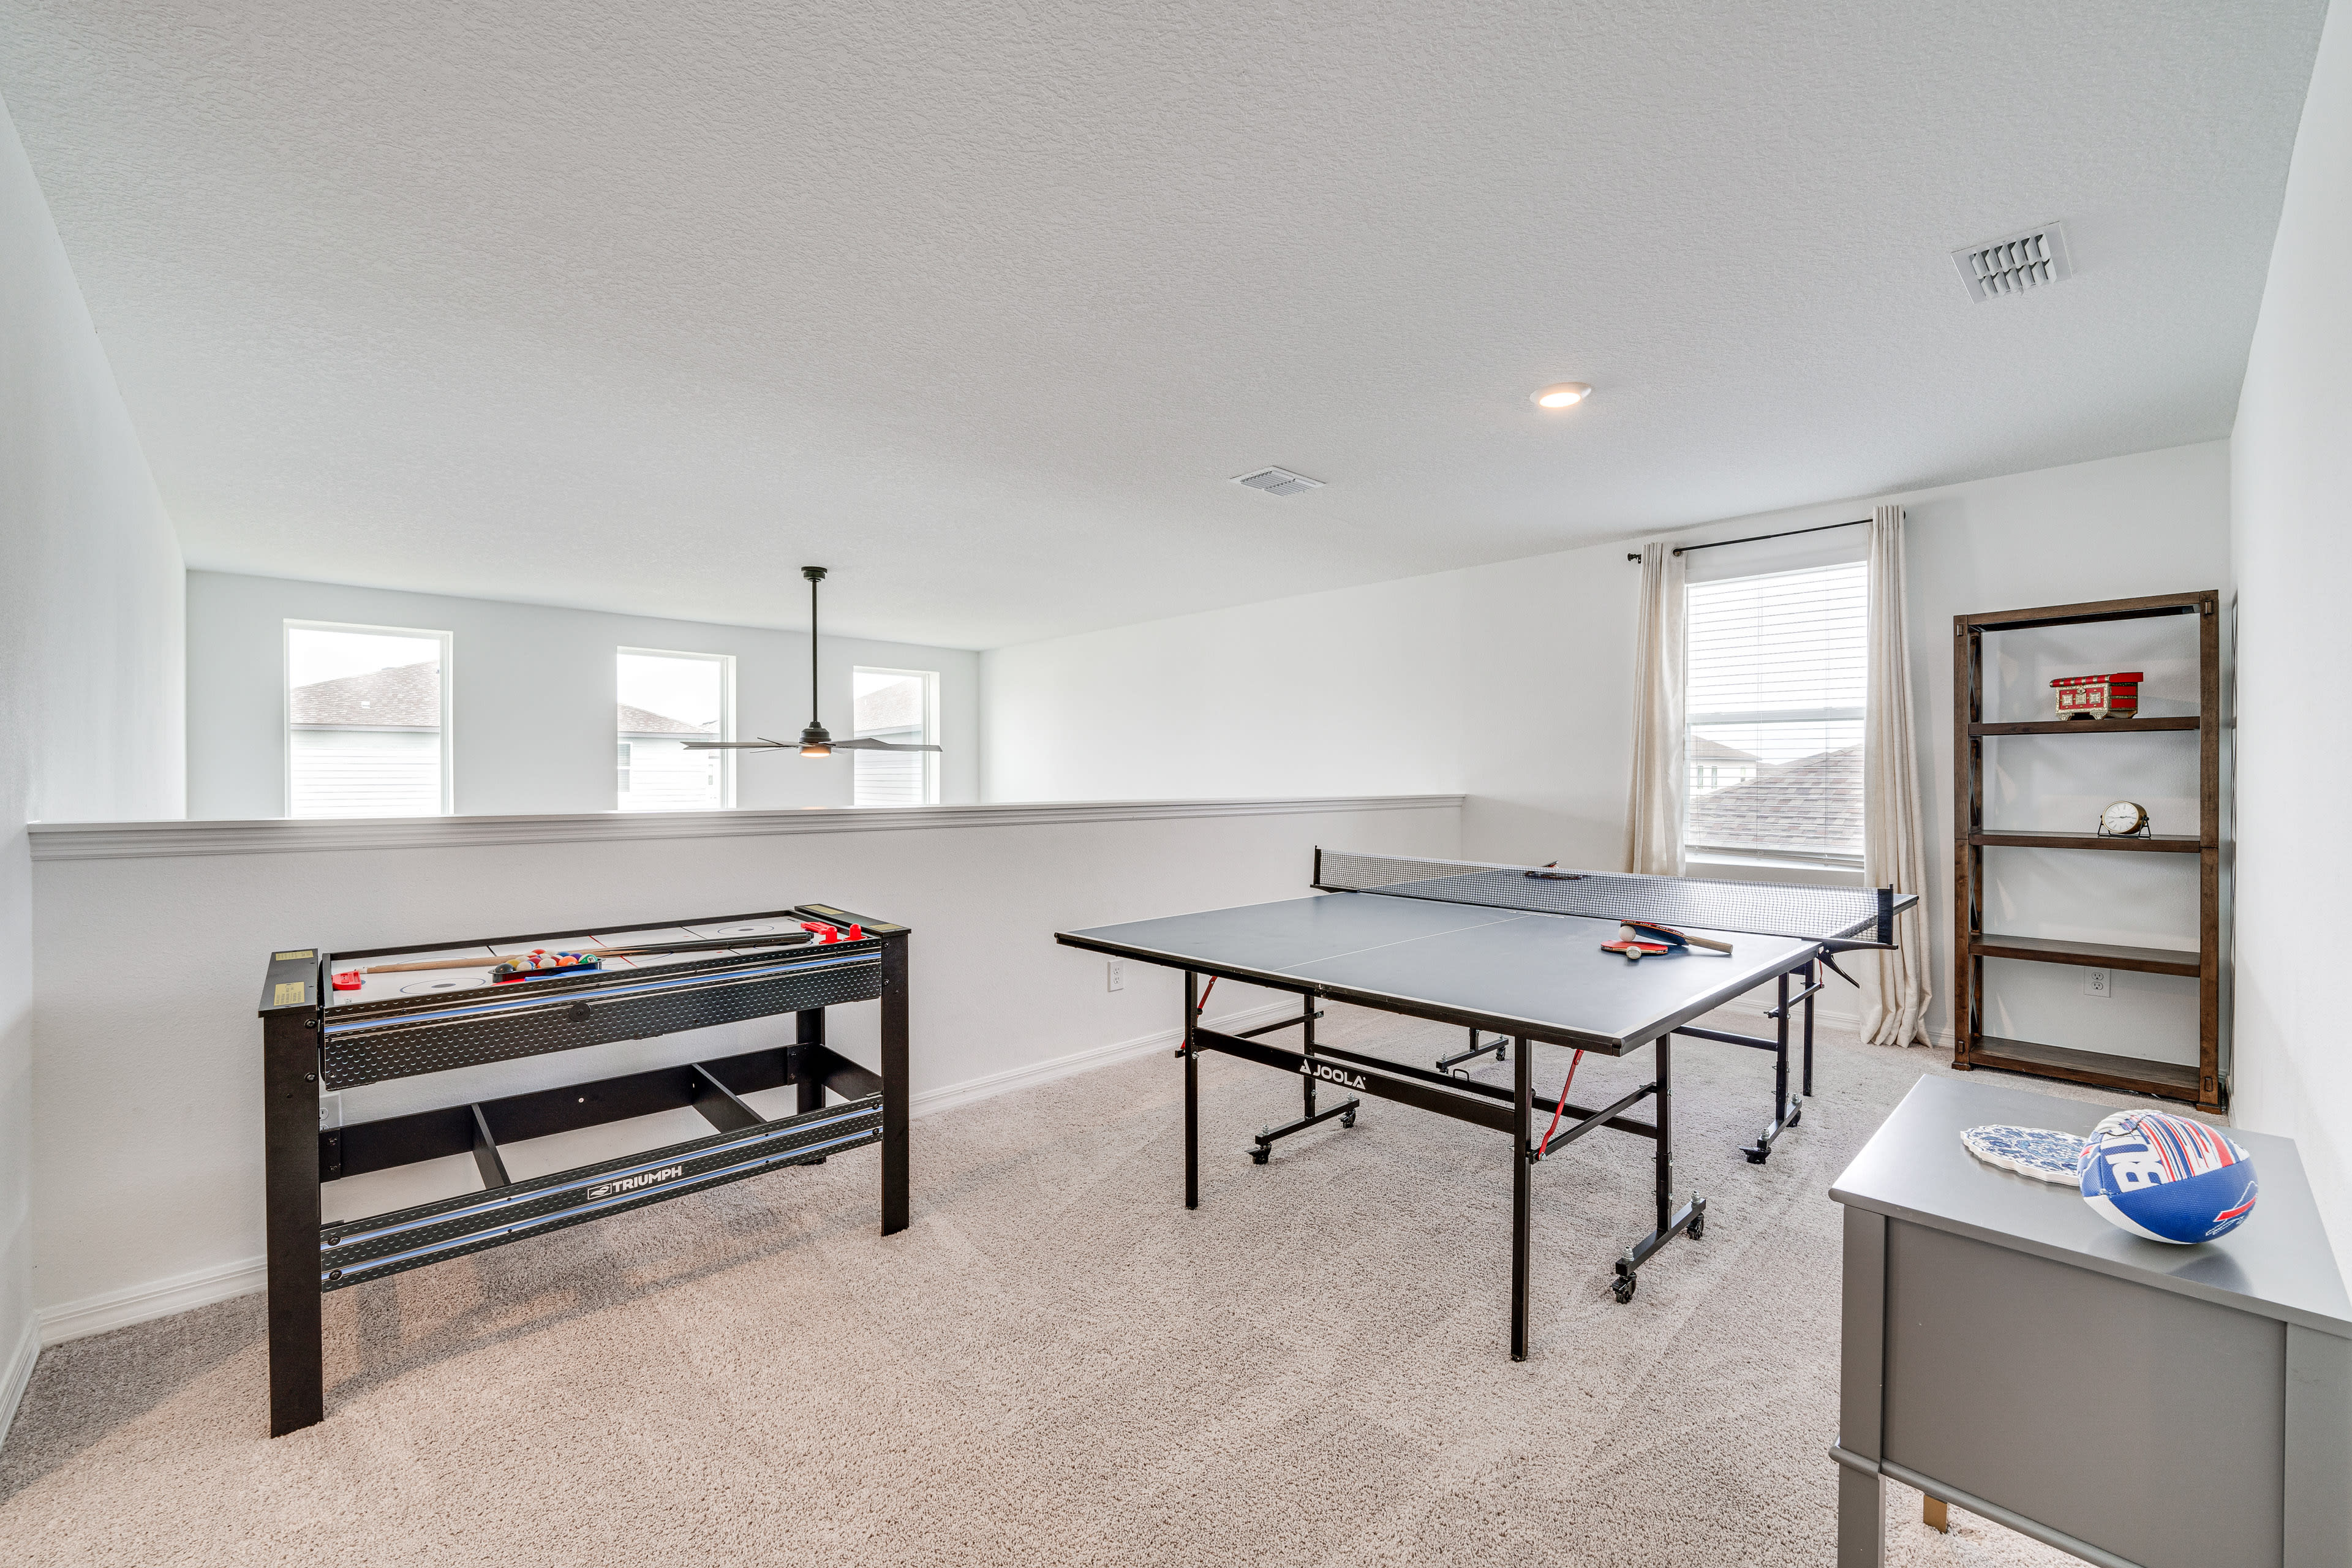 Game Area | Convertible Pool/Air Hockey Table | Ping-Pong Table